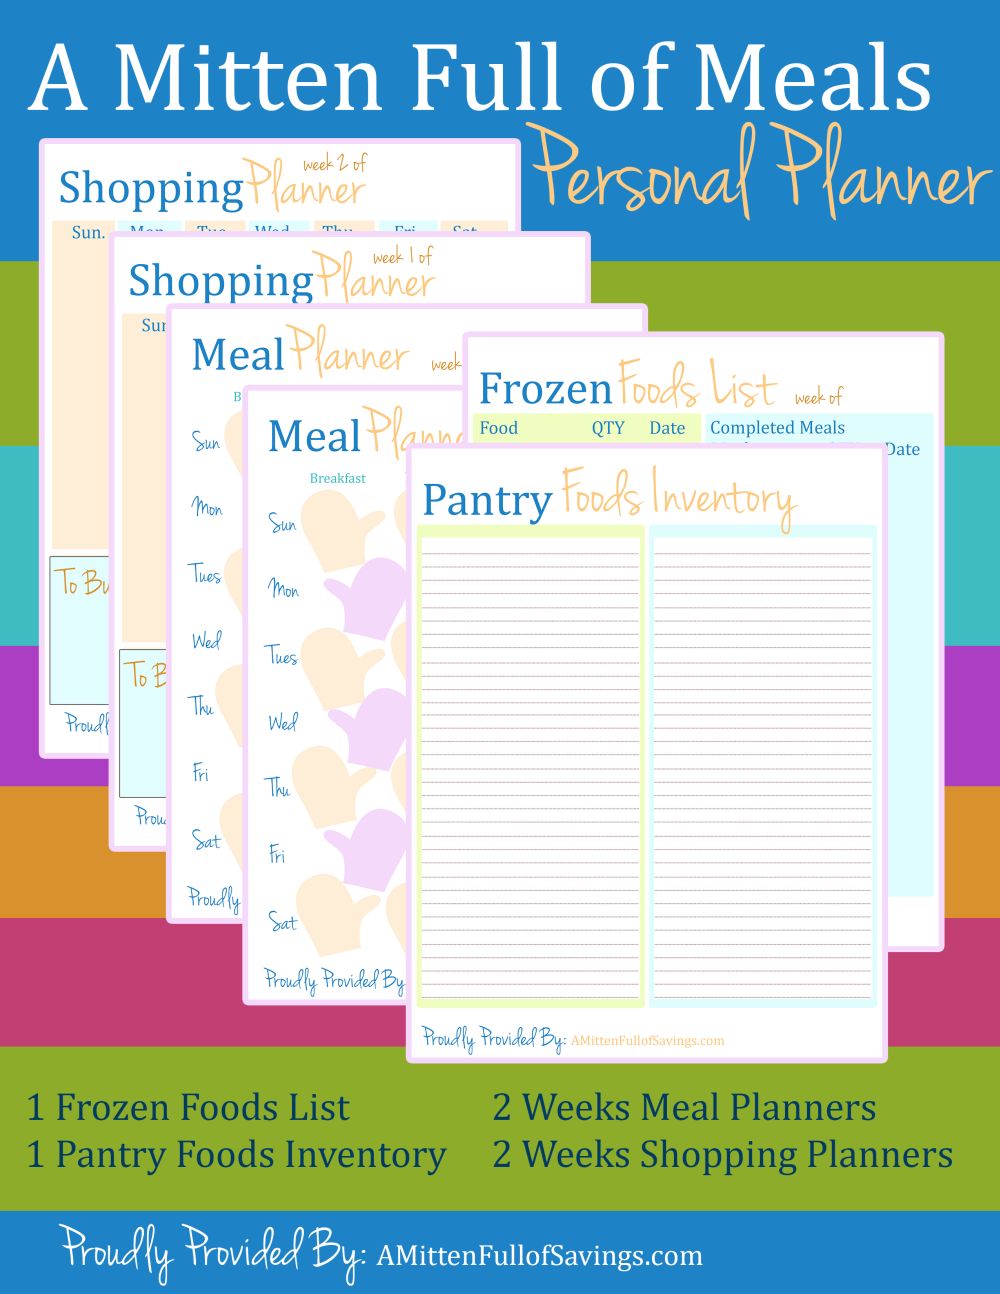 Personal Planner: Meal Planner Printables, how to create a meal plan, ways to save on food, grocery budget,